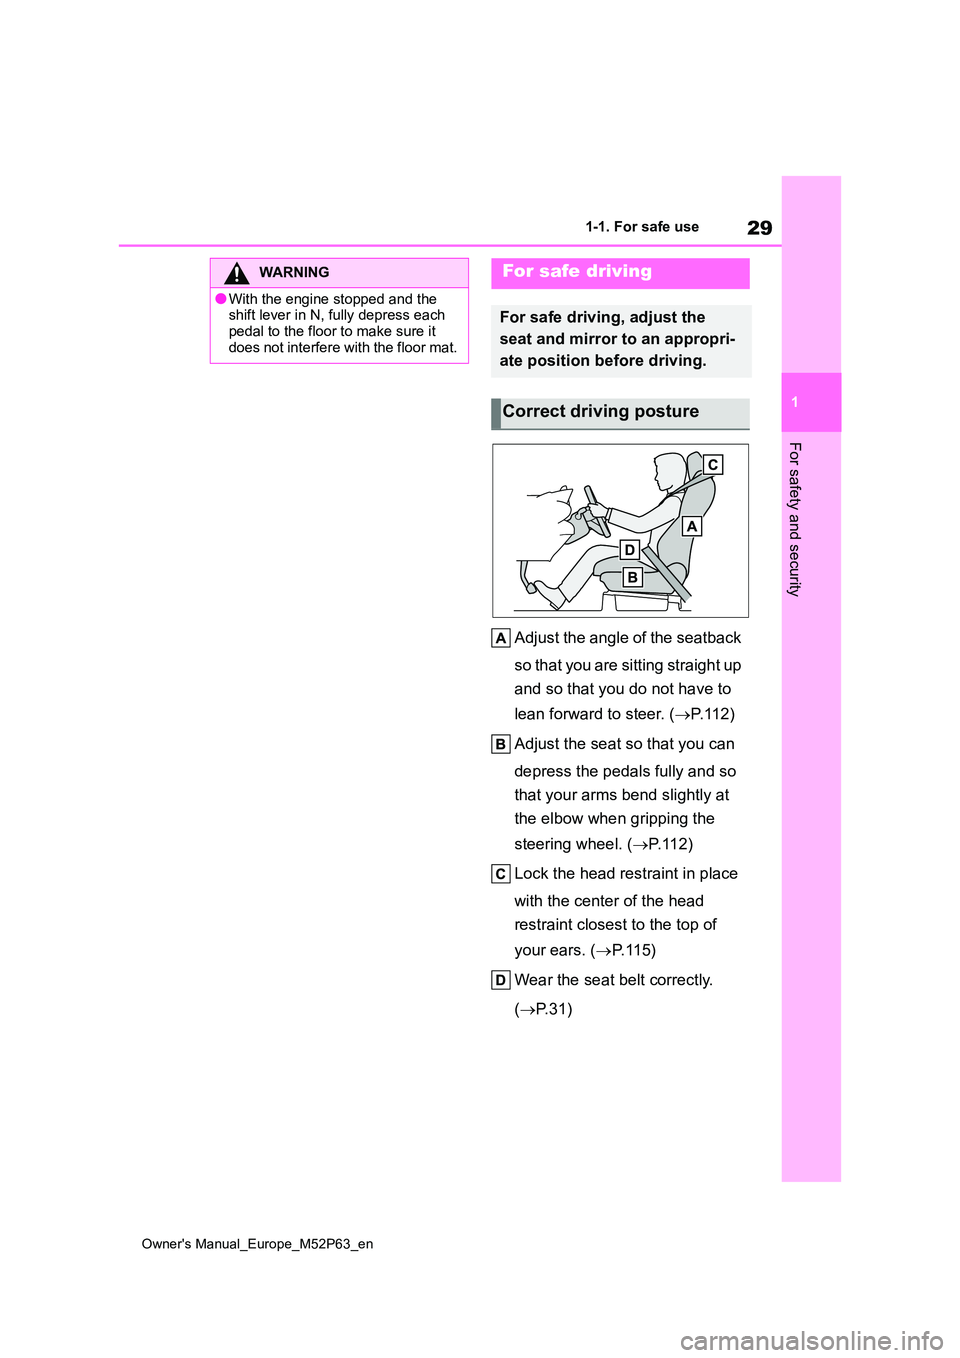 TOYOTA GR YARIS 2023  Owners Manual 29
1
Owner's Manual_Europe_M52P63_en
1-1. For safe use
For safety and security
Adjust the angle of the seatback  
so that you are sitting straight up  
and so that you do not have to  
lean forwar